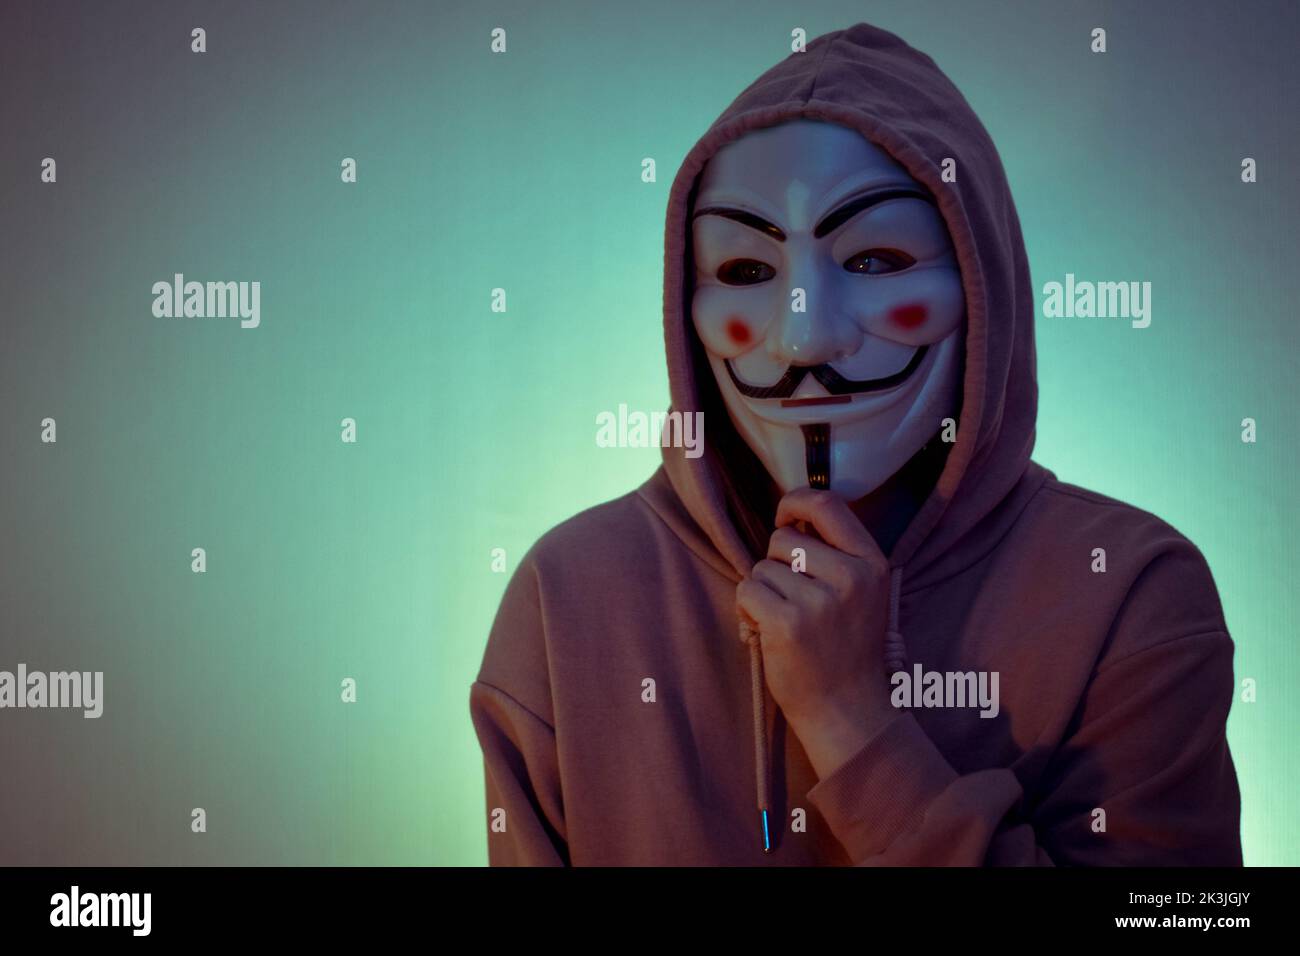 A portrait of a person wearing a hoodie and the Guy Fawkes mask Stock Photo